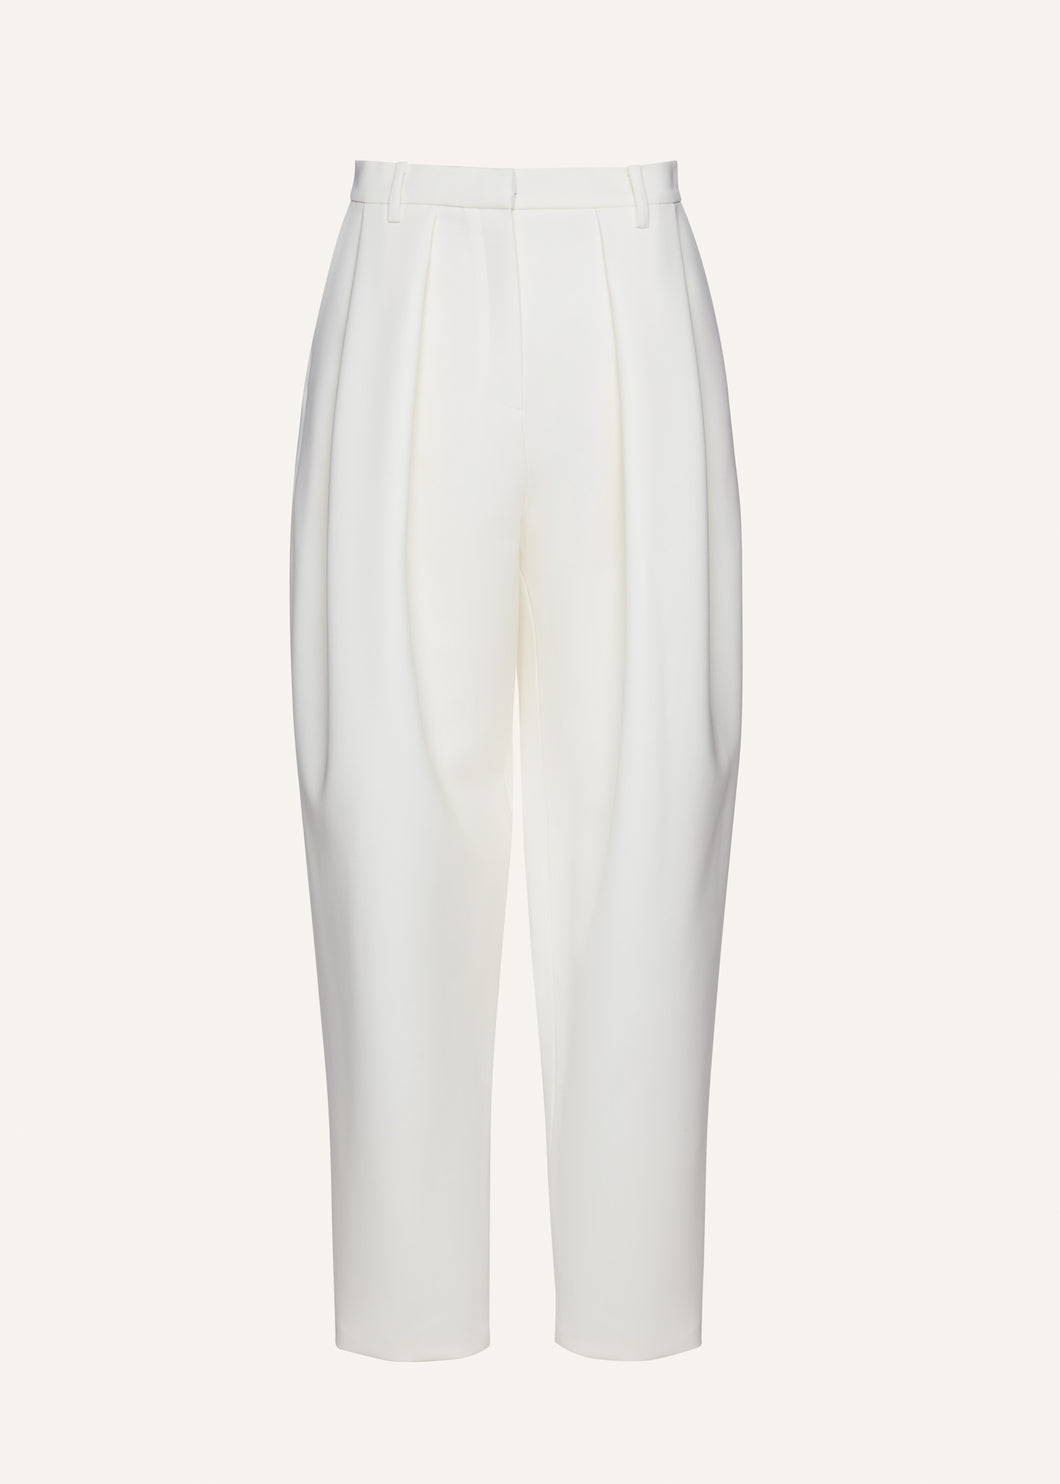 Tapered wool trousers in cream